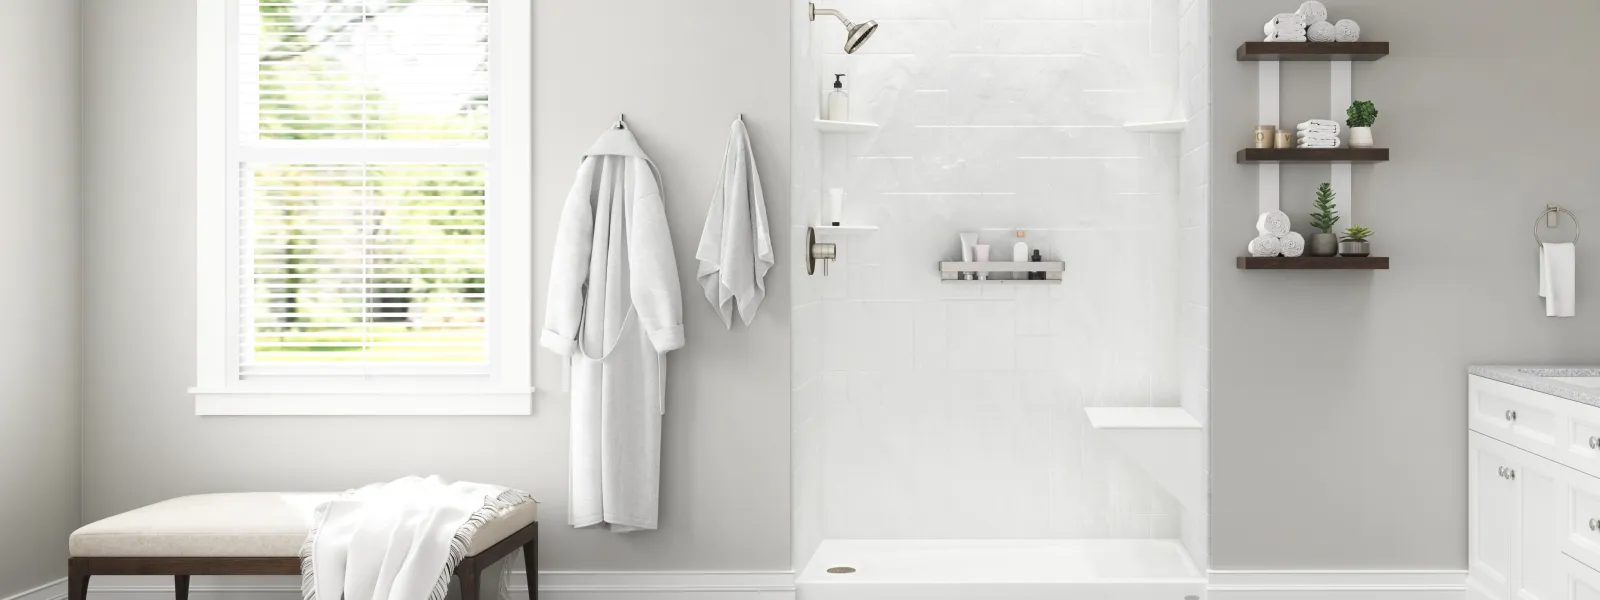 Should You Have Windows in the Bathroom?